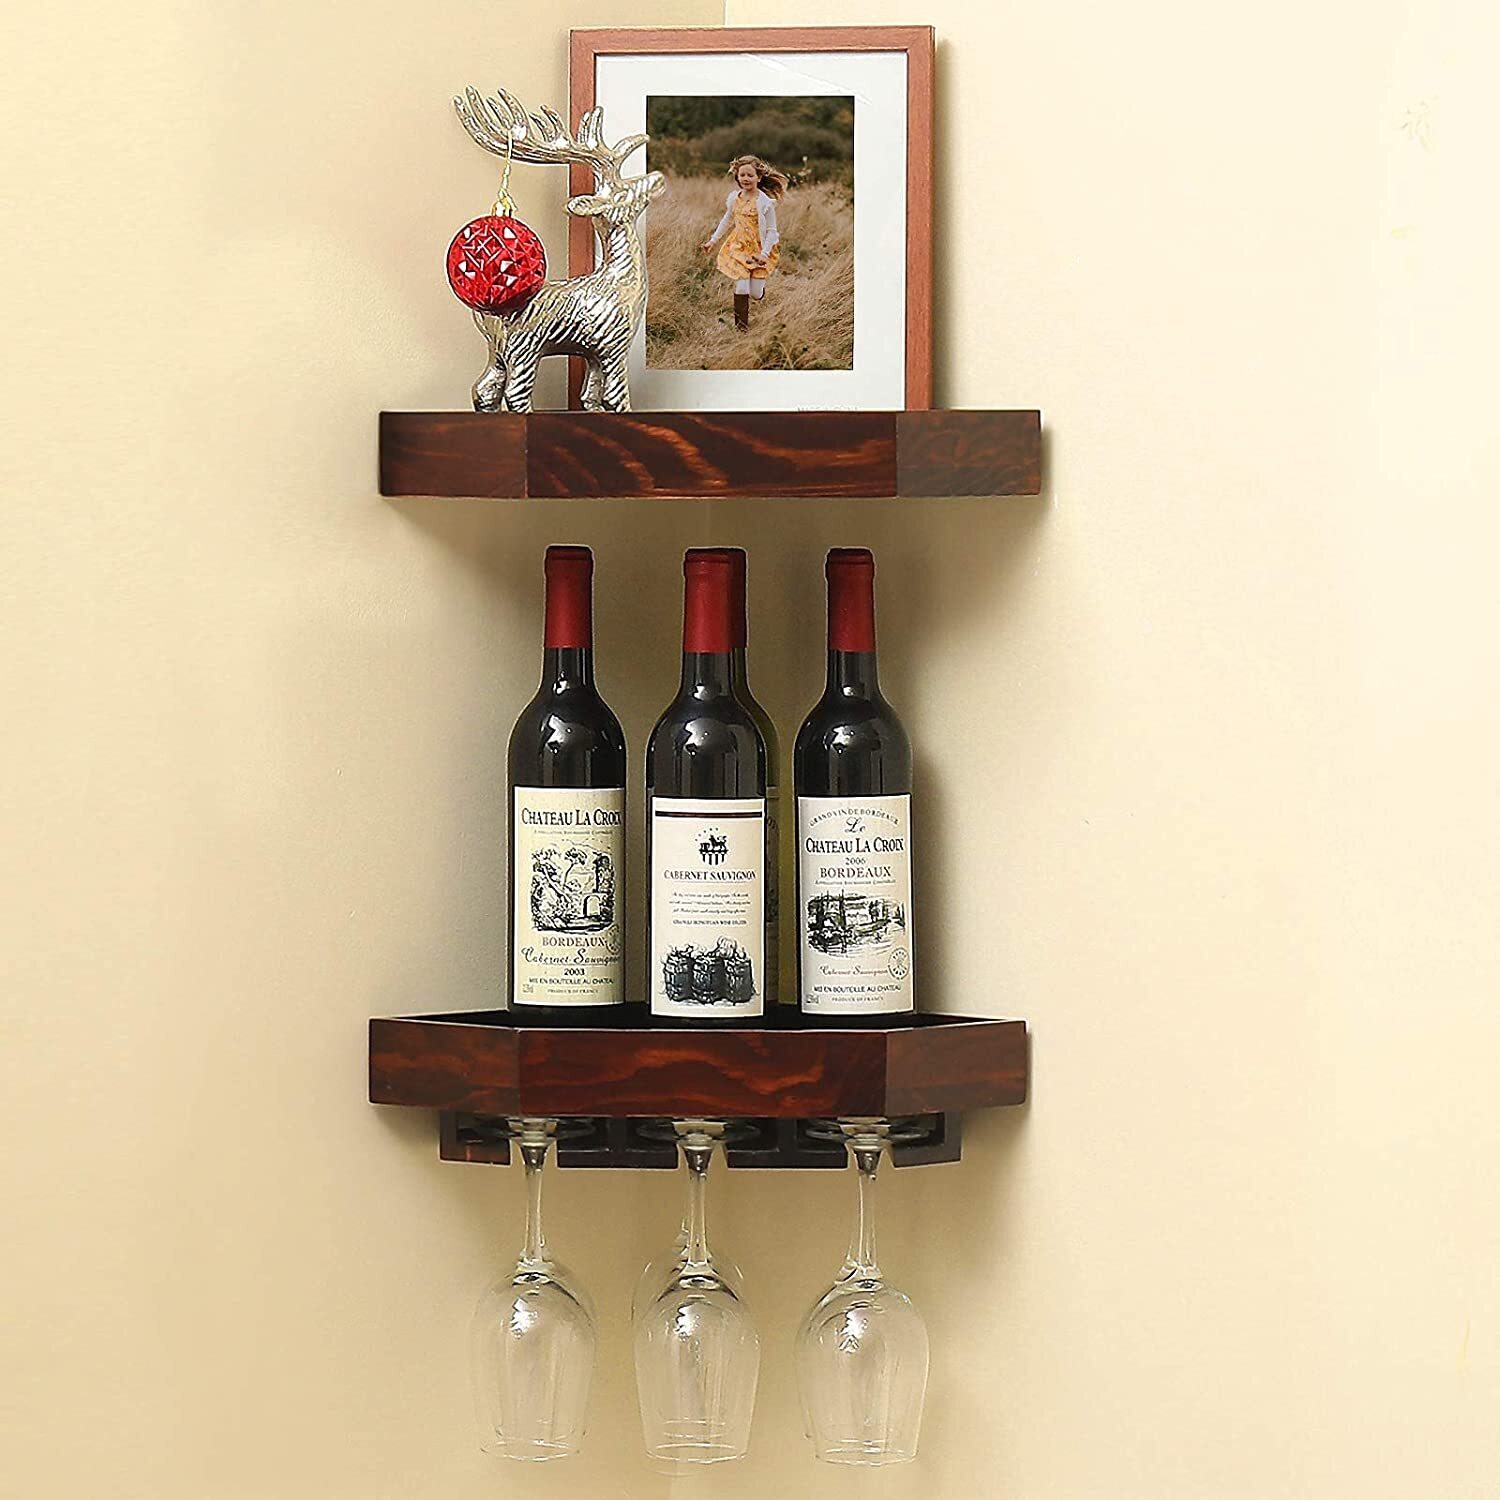 Wooden Wine Bottle and Glass Caddy, Portable Rustic Wine Glass